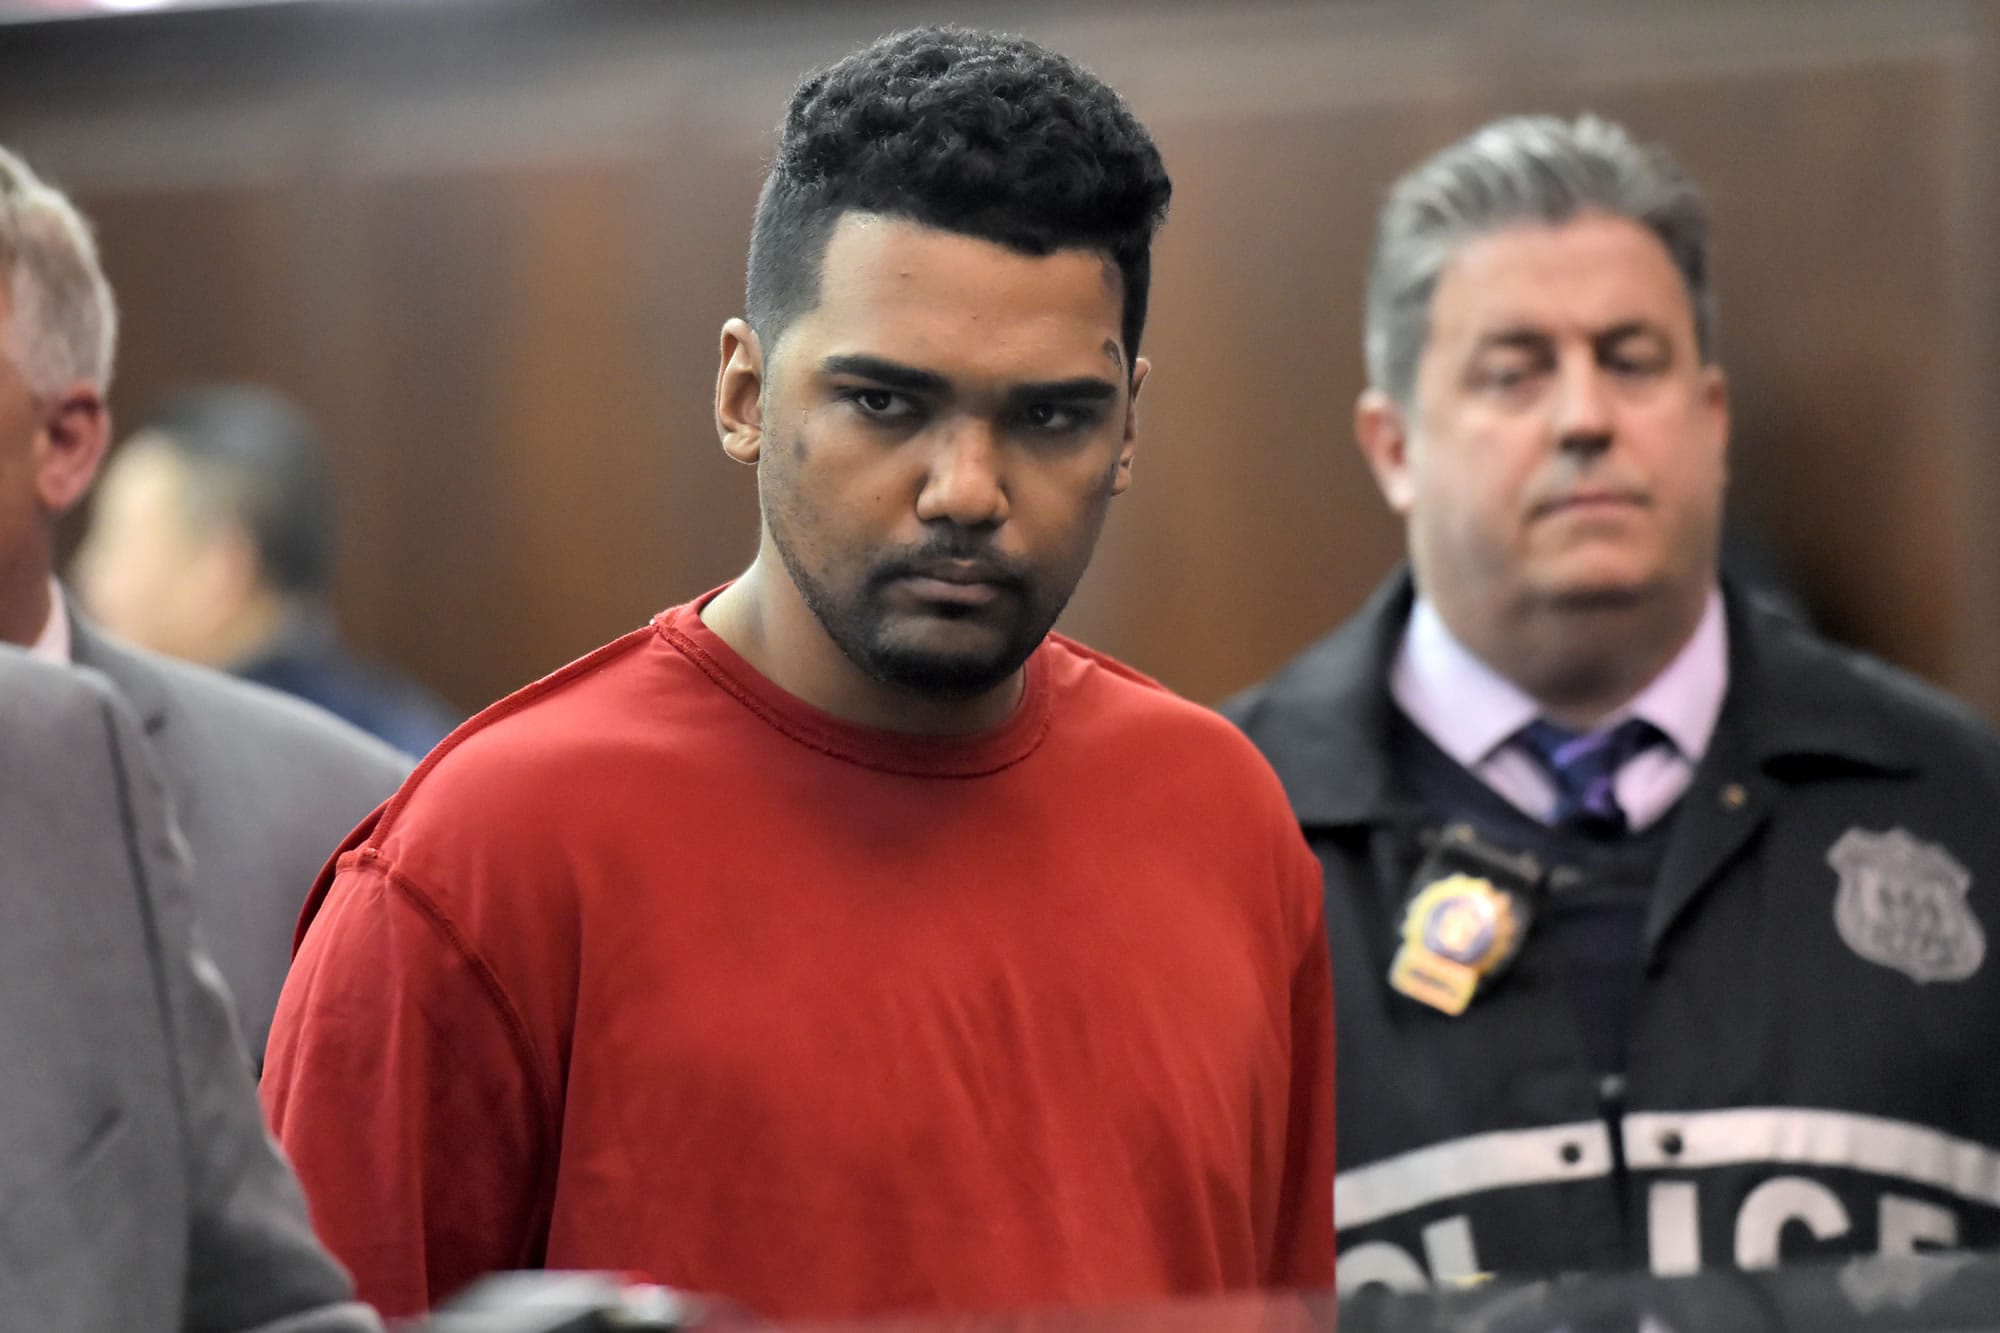 Richard Rojas, of the Bronx, N.Y., appears during his arraignment in Manhattan Criminal Court, in New York, Friday, May 19, 2017. Rojas is accused of mowing down a crowd of Times Square pedestrians with his car on Thursday. (R.